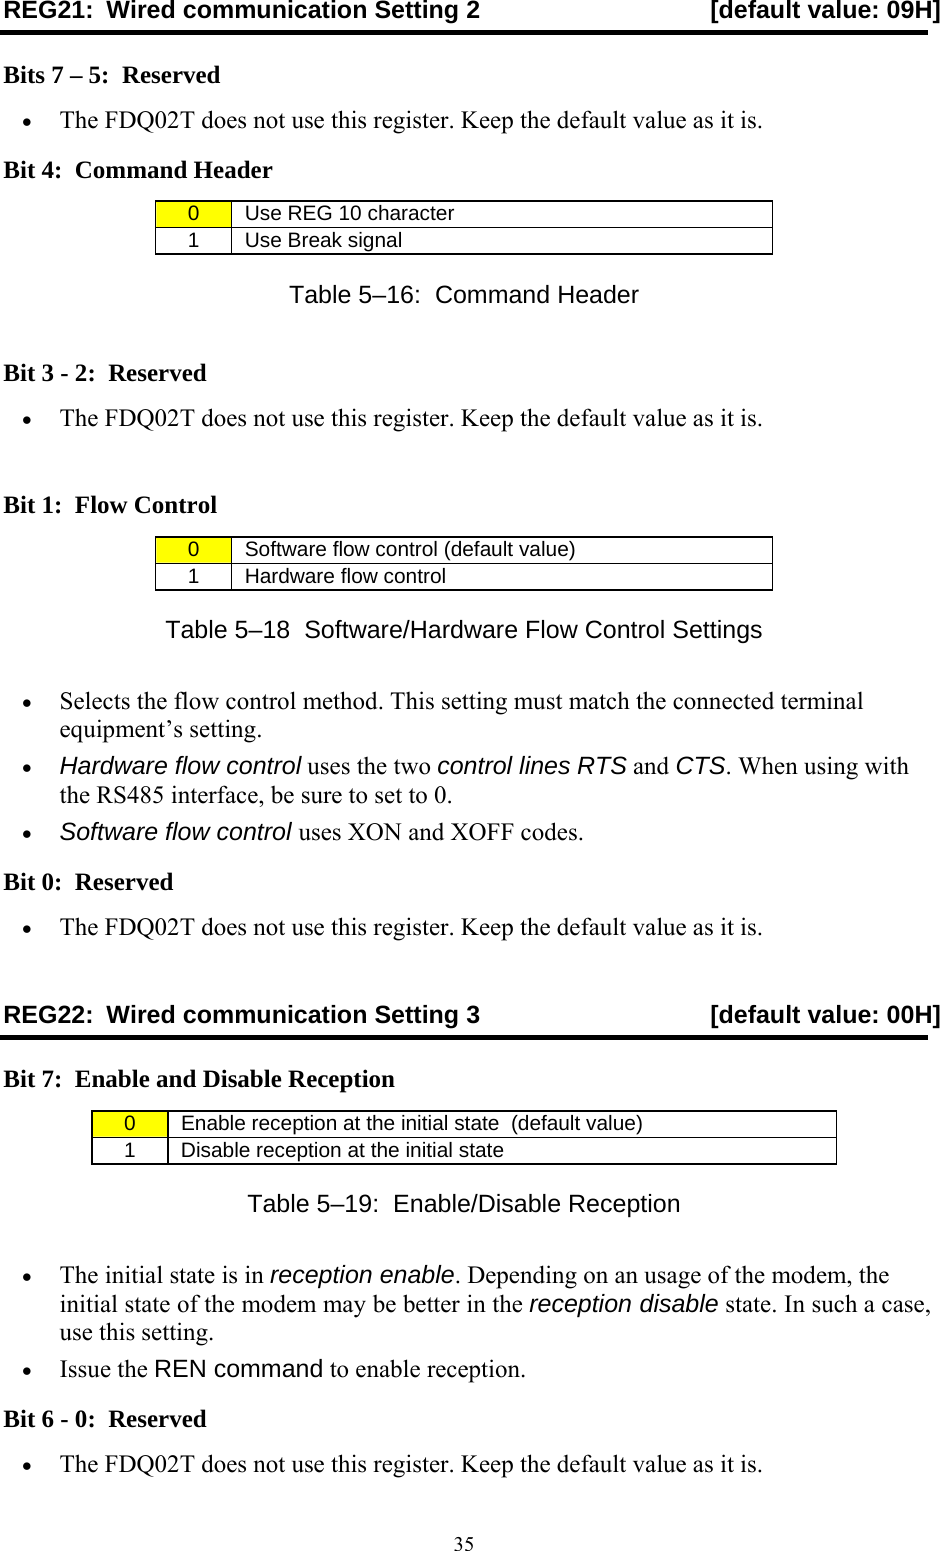  35REG21:  Wired communication Setting 2  [default value: 09H] Bits 7 – 5:  Reserved •  The FDQ02T does not use this register. Keep the default value as it is. Bit 4:  Command Header 0   Use REG 10 character 1   Use Break signal Table 5–16:  Command Header Bit 3 - 2:  Reserved  •  The FDQ02T does not use this register. Keep the default value as it is.  Bit 1:  Flow Control 0   Software flow control (default value) 1   Hardware flow control Table 5–18  Software/Hardware Flow Control Settings •  Selects the flow control method. This setting must match the connected terminal equipment’s setting. •  Hardware flow control uses the two control lines RTS and CTS. When using with the RS485 interface, be sure to set to 0. •  Software flow control uses XON and XOFF codes. Bit 0:  Reserved  •  The FDQ02T does not use this register. Keep the default value as it is. REG22:  Wired communication Setting 3  [default value: 00H] Bit 7:  Enable and Disable Reception 0   Enable reception at the initial state  (default value) 1   Disable reception at the initial state  Table 5–19:  Enable/Disable Reception •  The initial state is in reception enable. Depending on an usage of the modem, the initial state of the modem may be better in the reception disable state. In such a case, use this setting. •  Issue the REN command to enable reception. Bit 6 - 0:  Reserved •  The FDQ02T does not use this register. Keep the default value as it is. 